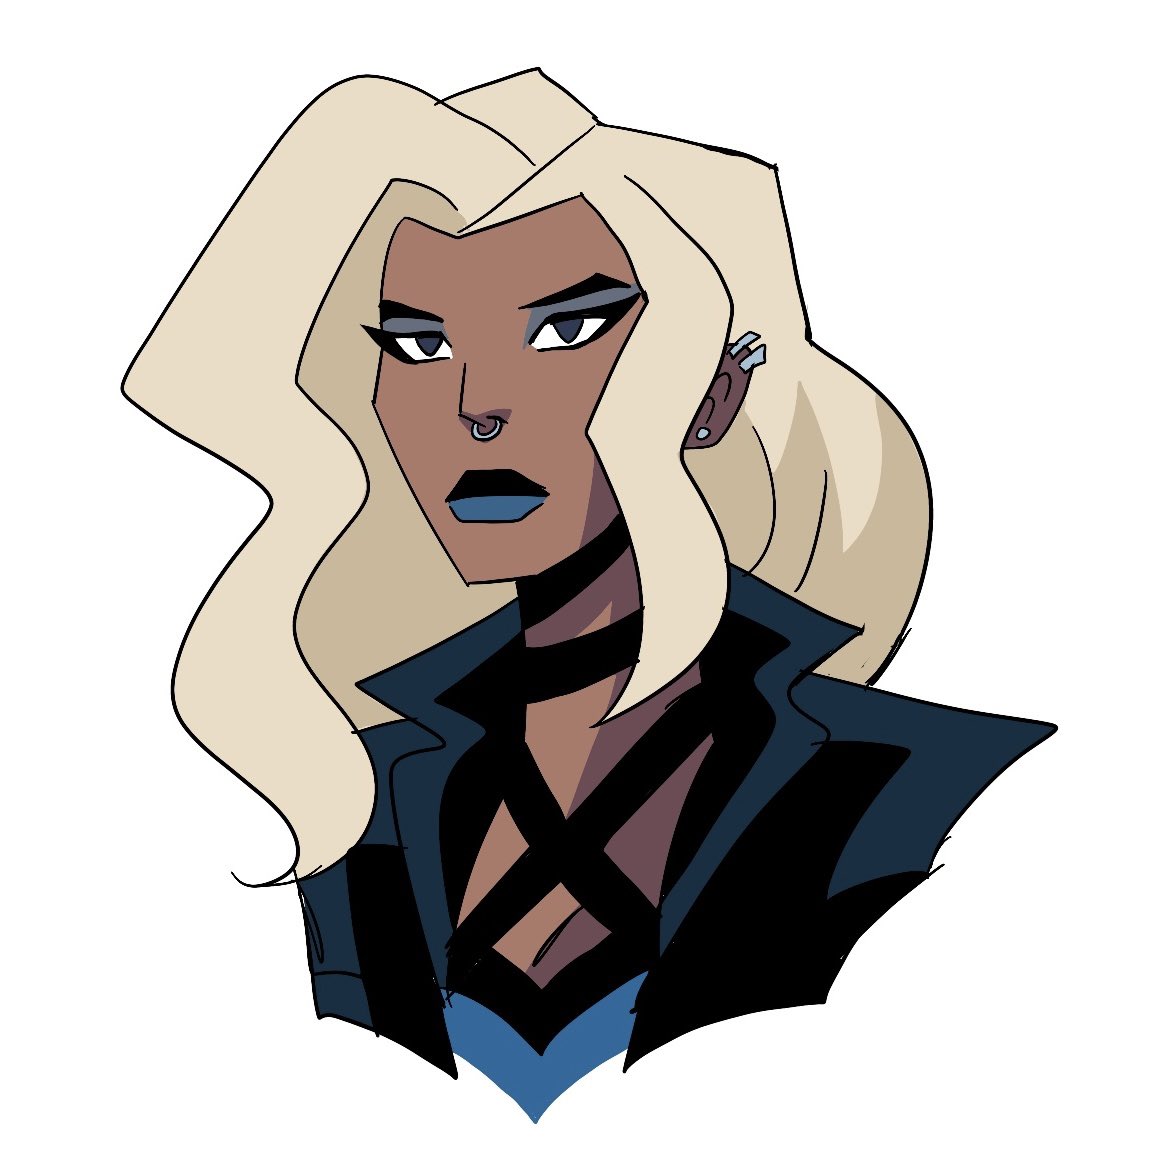 Drawing Wildcat made me want to draw #BlackCanary. So here’s a doodle for Black Canary II. Someday I’ll get around to sharing my design for the first Black Canary 👀
 #DinahLance